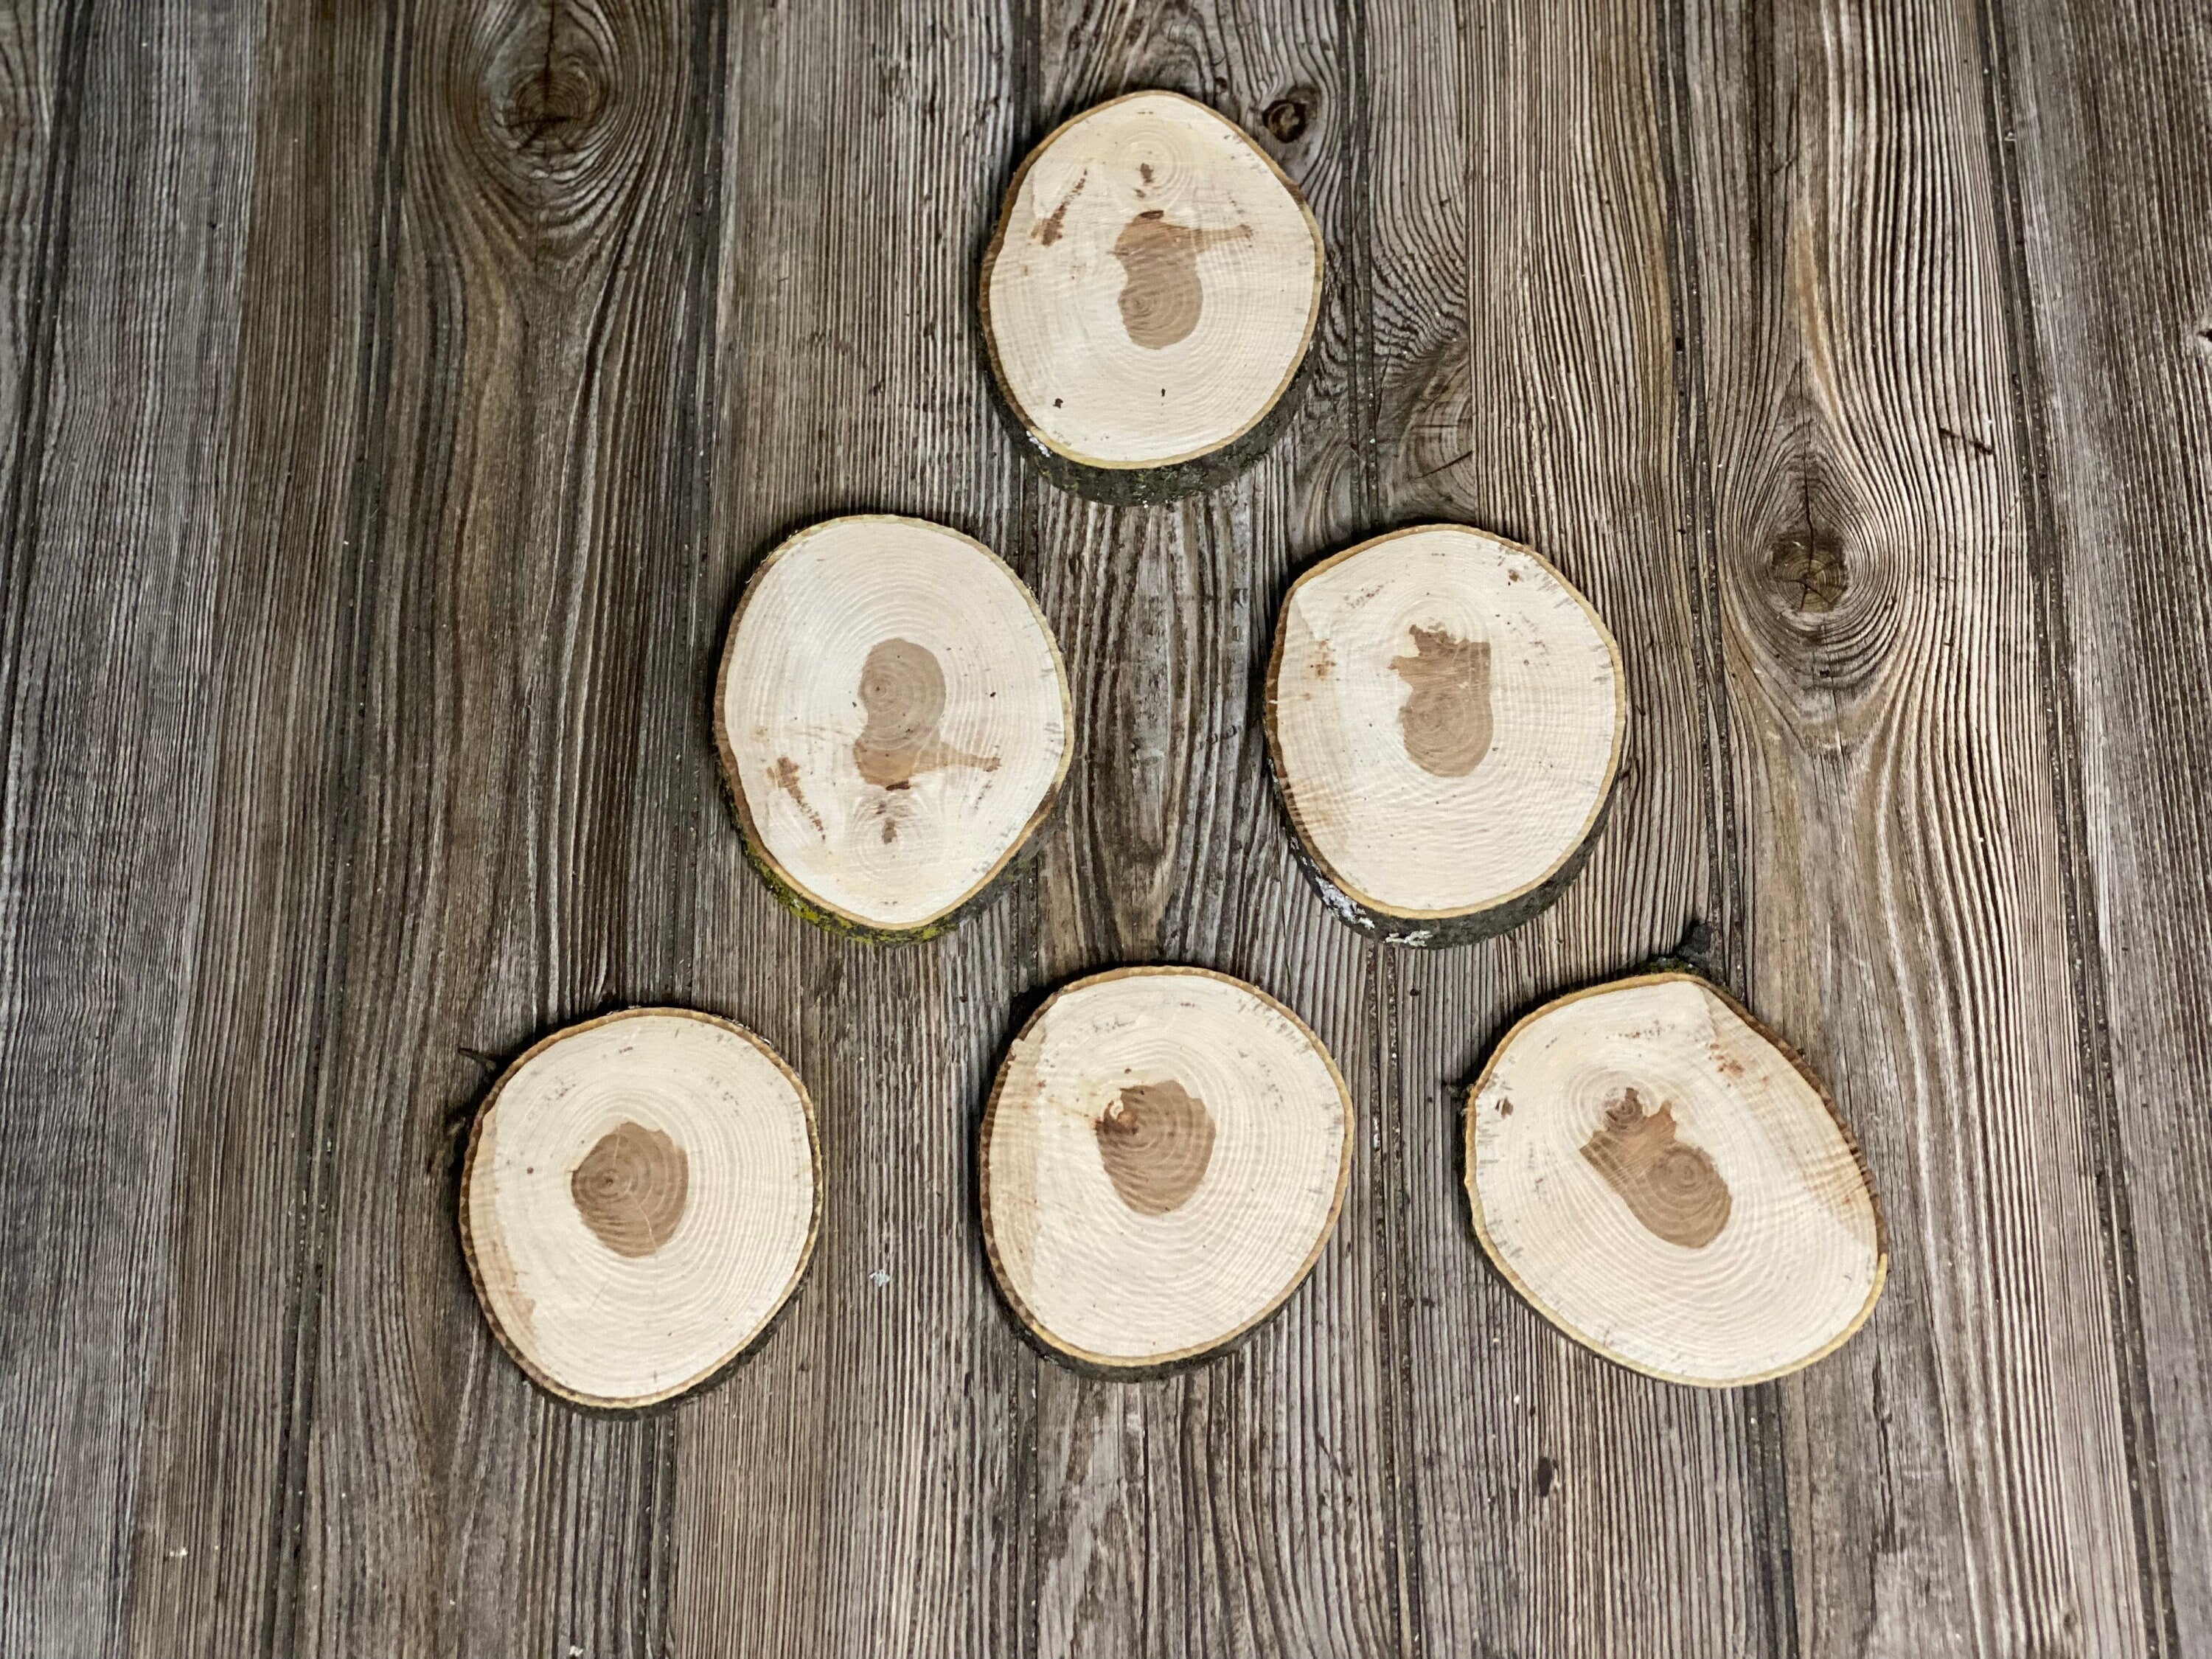 Six Hickory Wood Slices, Approximately 4.5-5 Inches Long by 4 Inches Wide and 3/4 Inch Thick